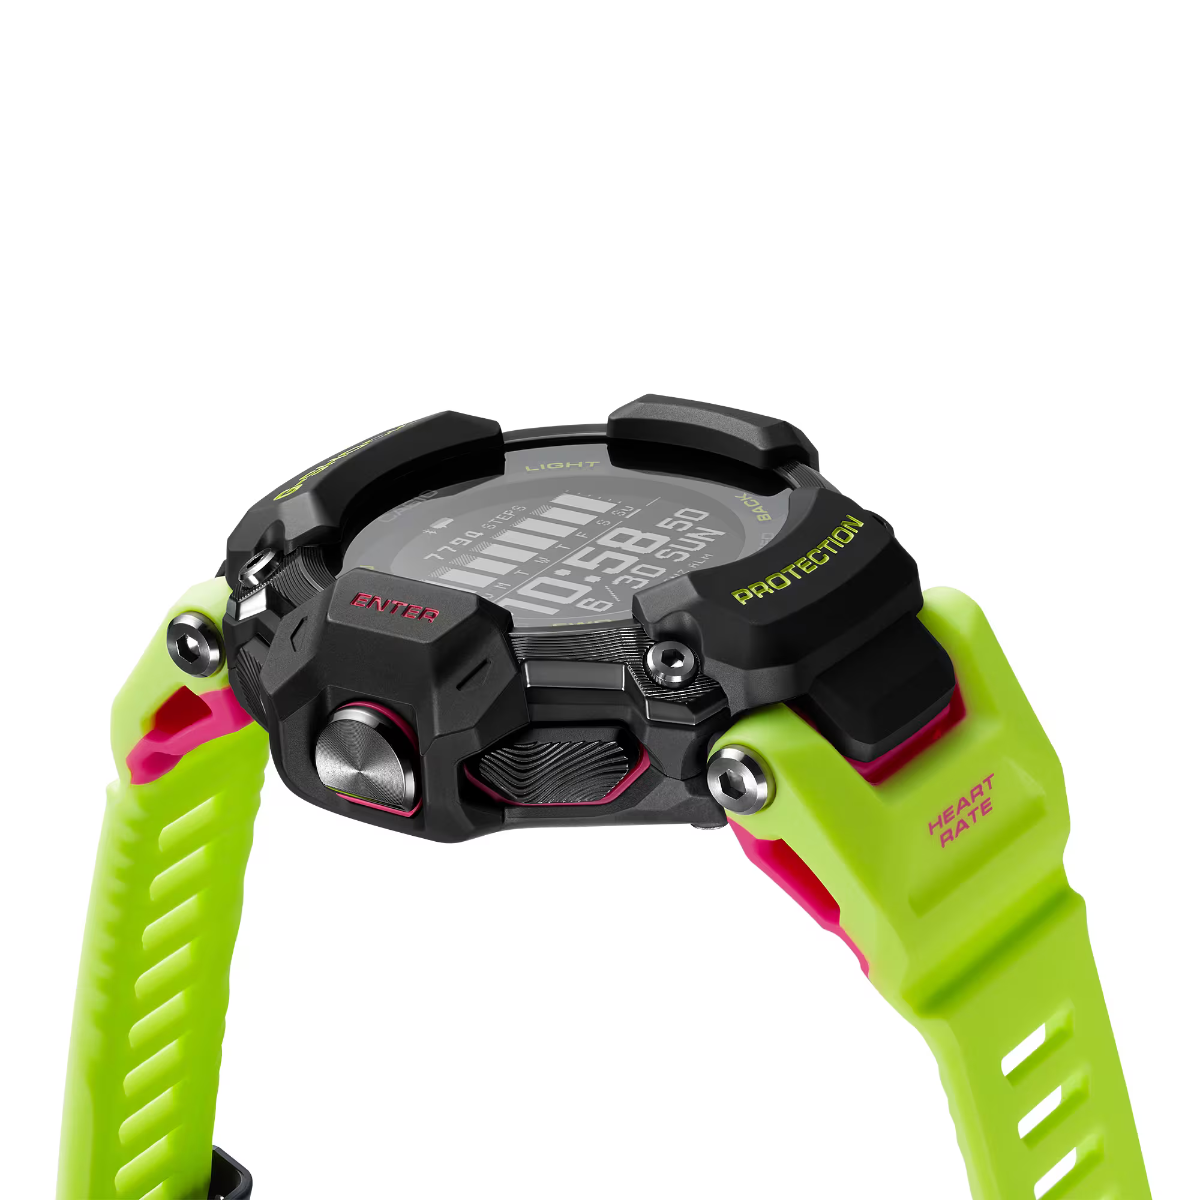 G-Shock Mens 200m G-SQUAD Solar Heart Rate and GPS - GBD-H2000-1A9FC